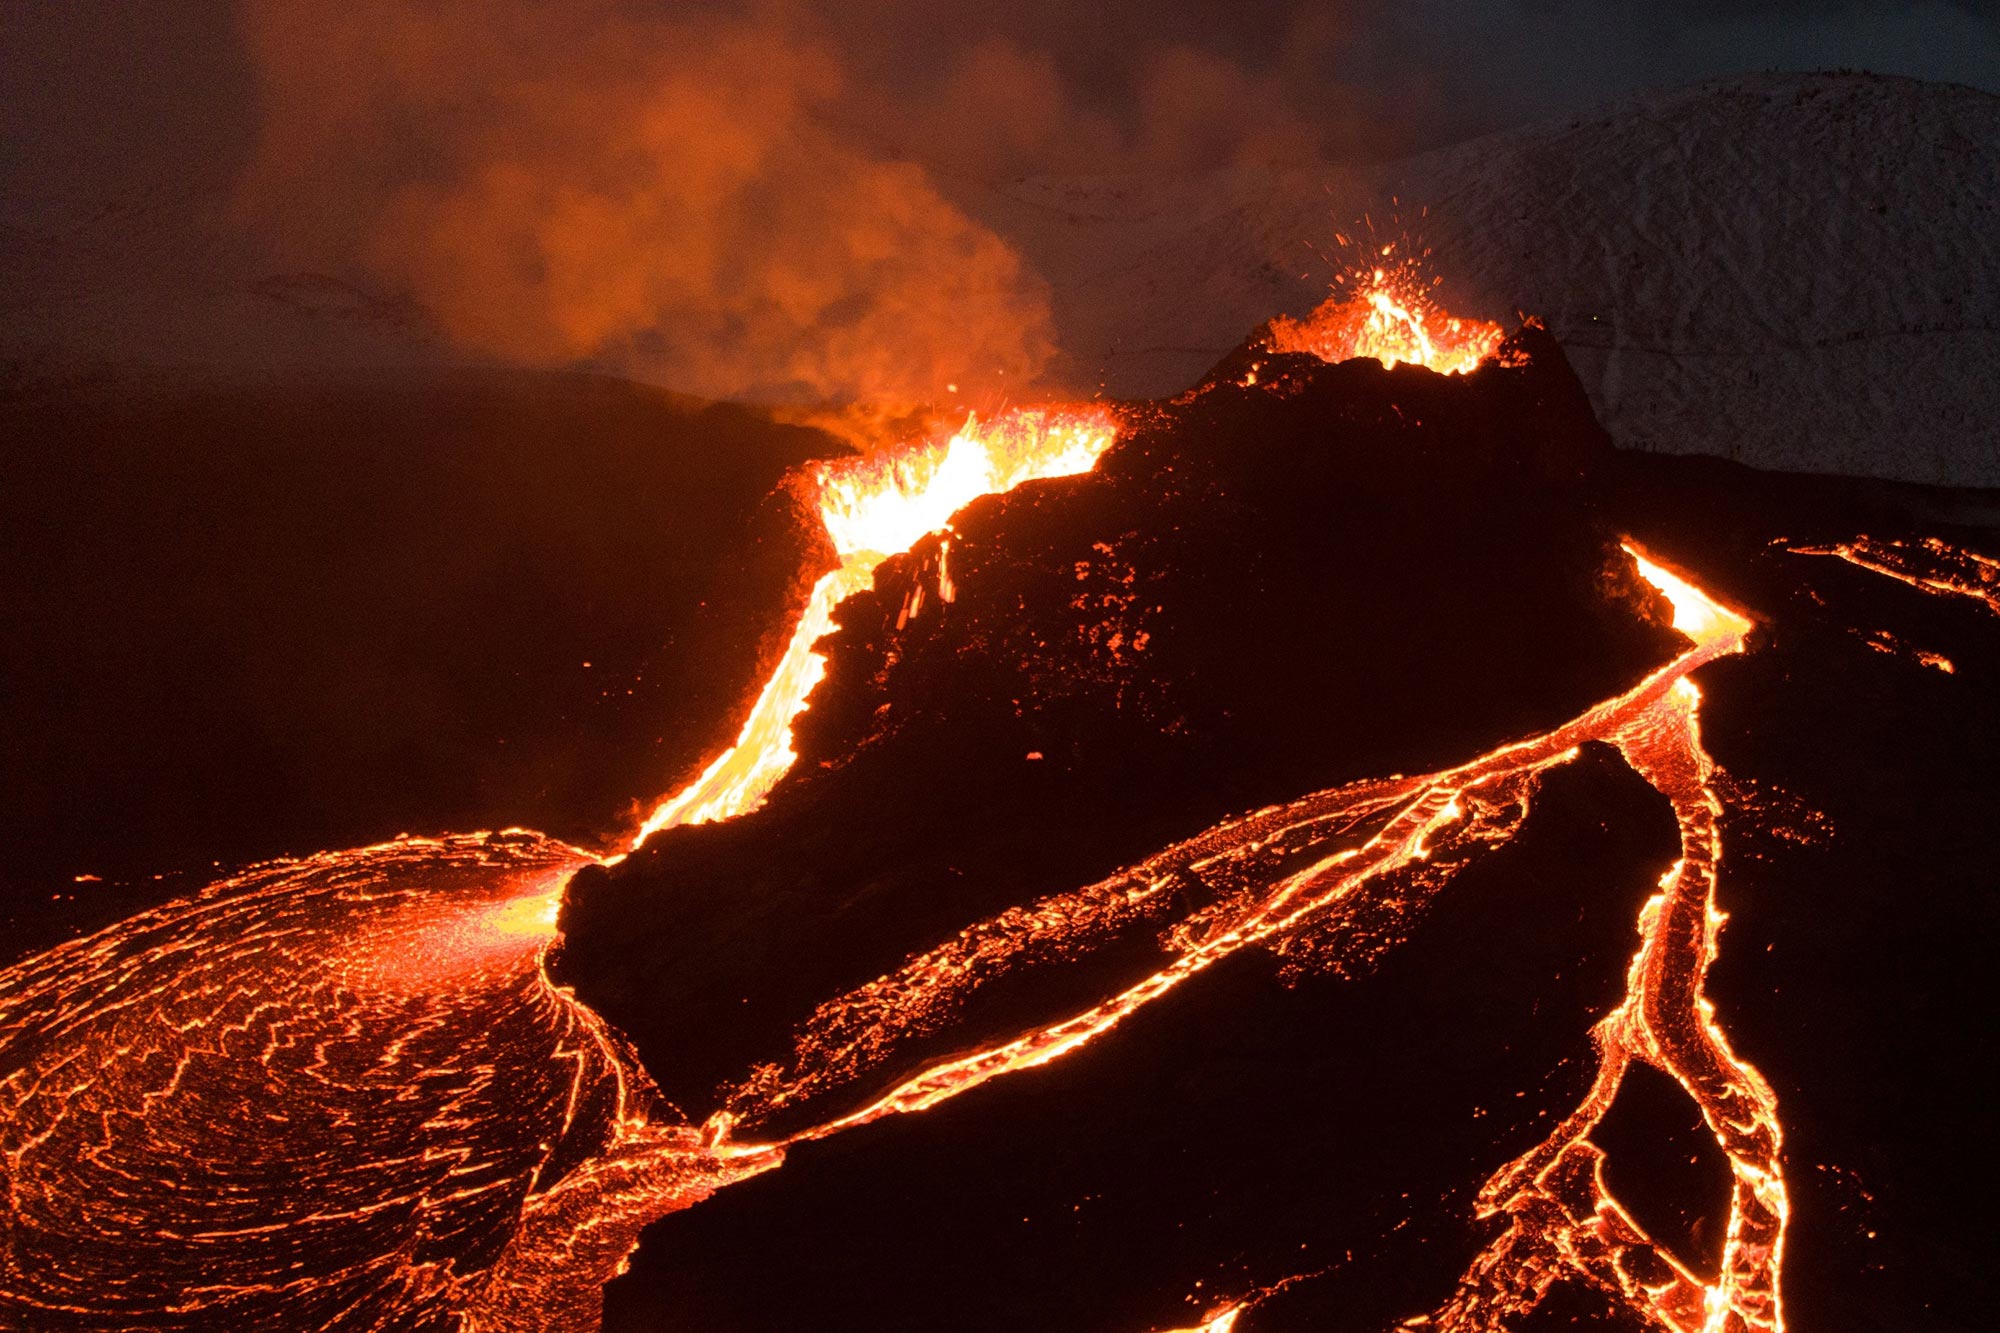 How Do Volcanoes Form? Scientists Find Surprisingly Cool “Hotspots” Under  Earth's Crust